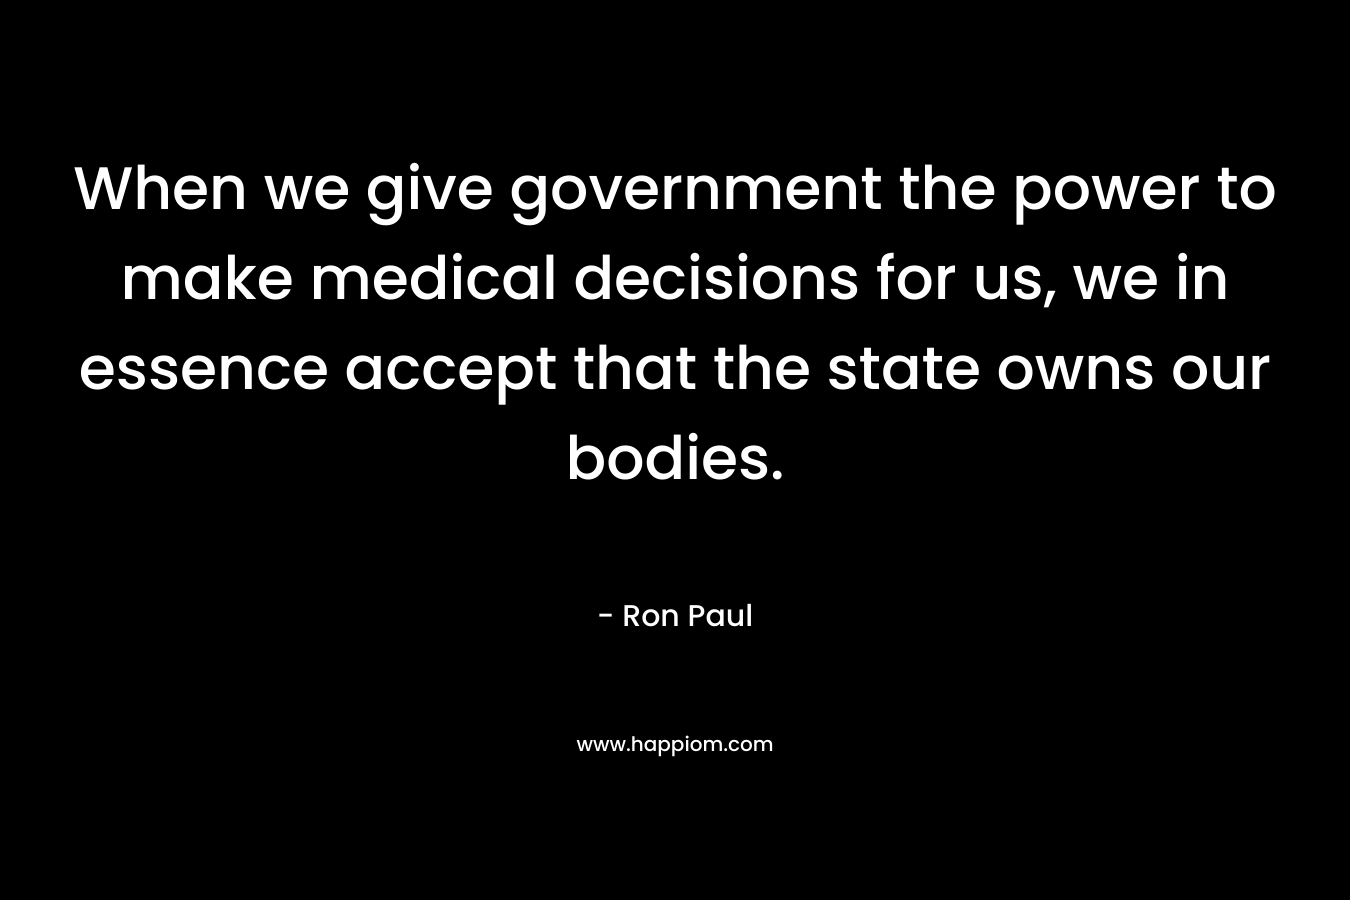 When we give government the power to make medical decisions for us, we in essence accept that the state owns our bodies. – Ron Paul